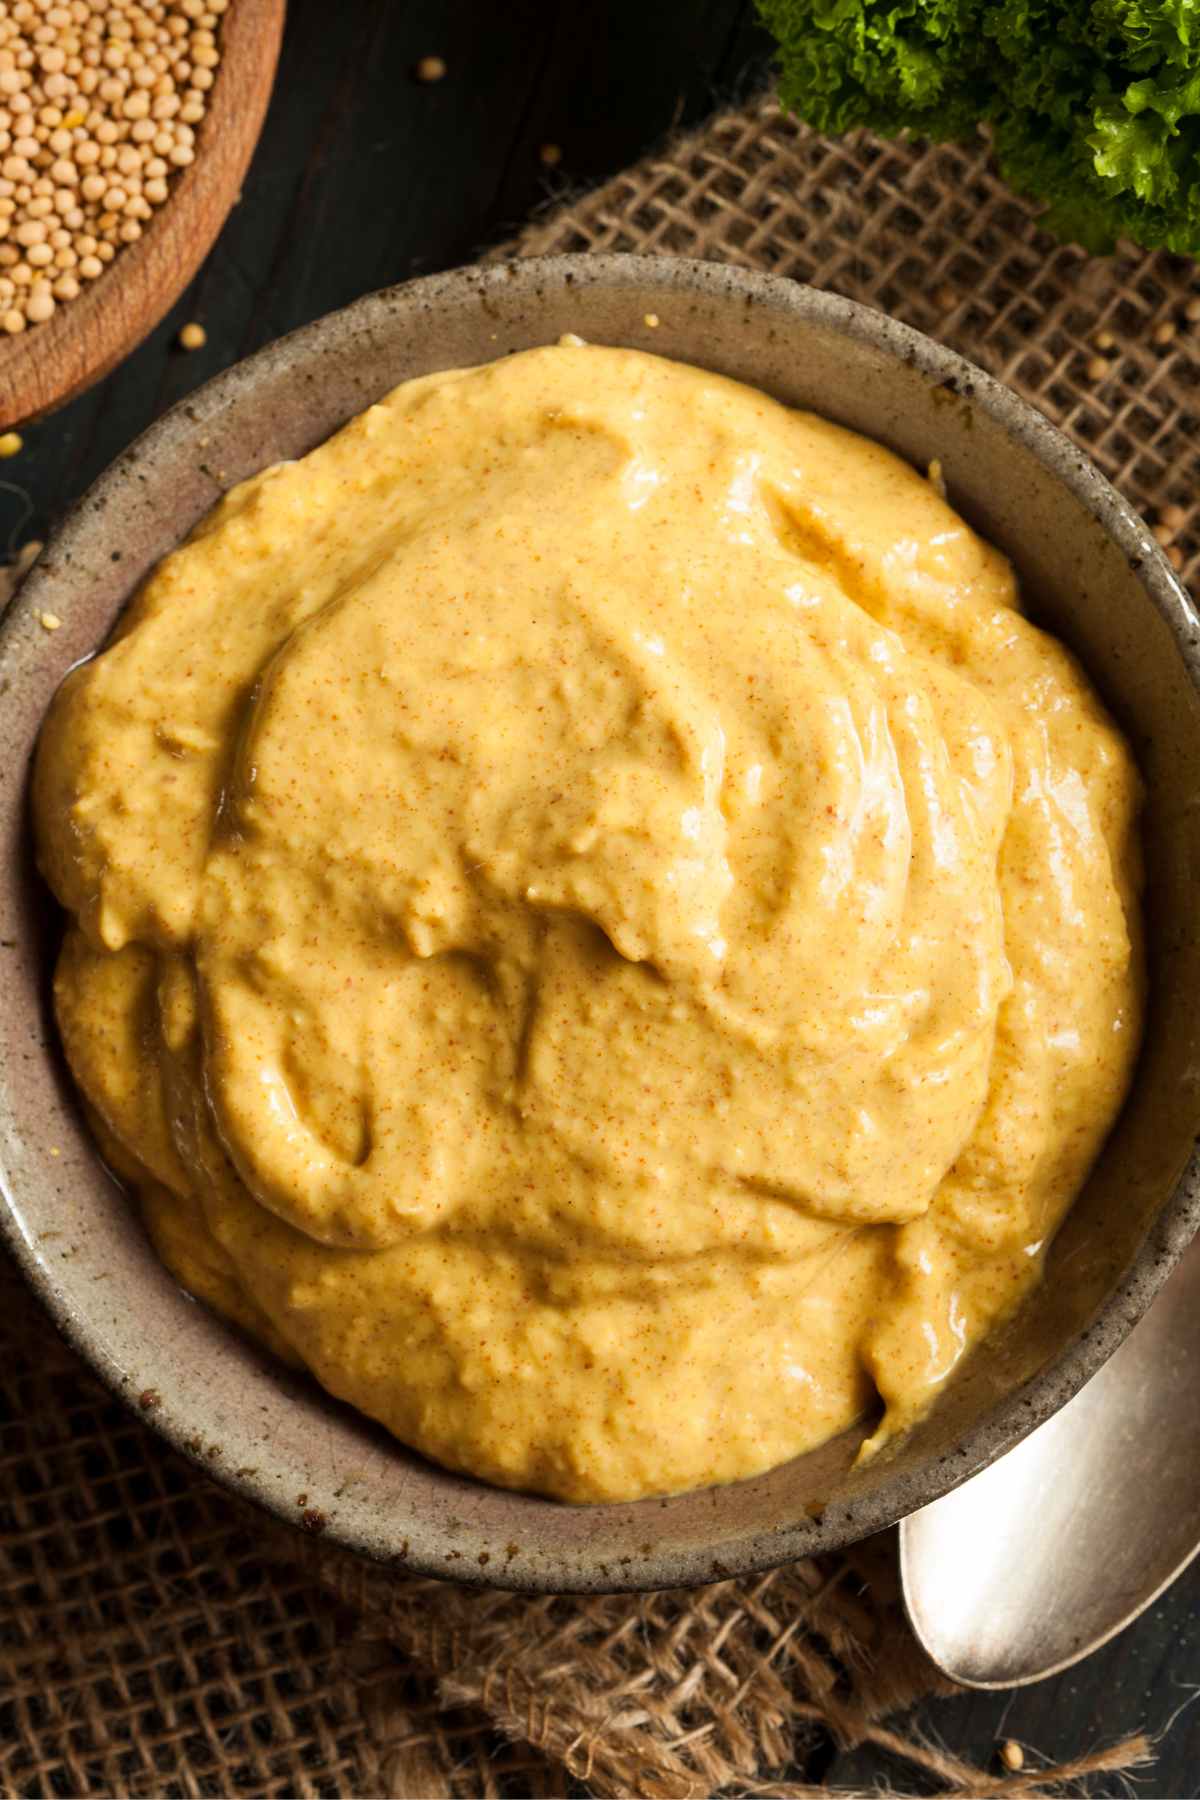 Is mustard keto-friendly? How many carbs are in mustard? For most of us, this is one of our favorite condiments, right? We get it! But what does the nutritional content look like? How much of it is safe to eat on a keto diet?